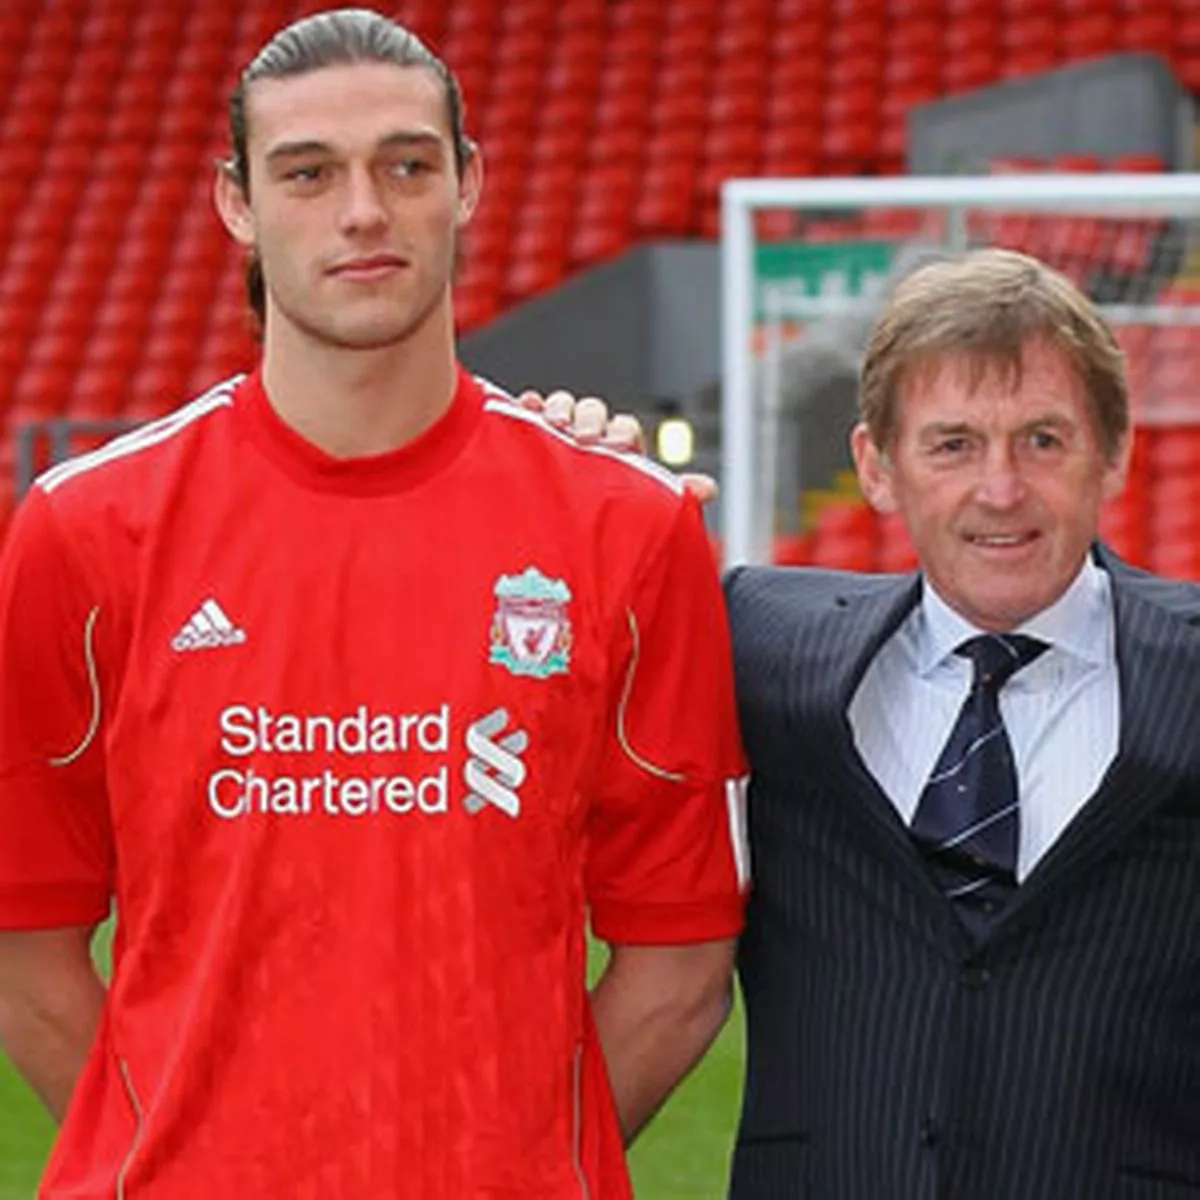 1_andy-carroll-with-kenny-dalglish-and-luis-suarez-781754786.jpg